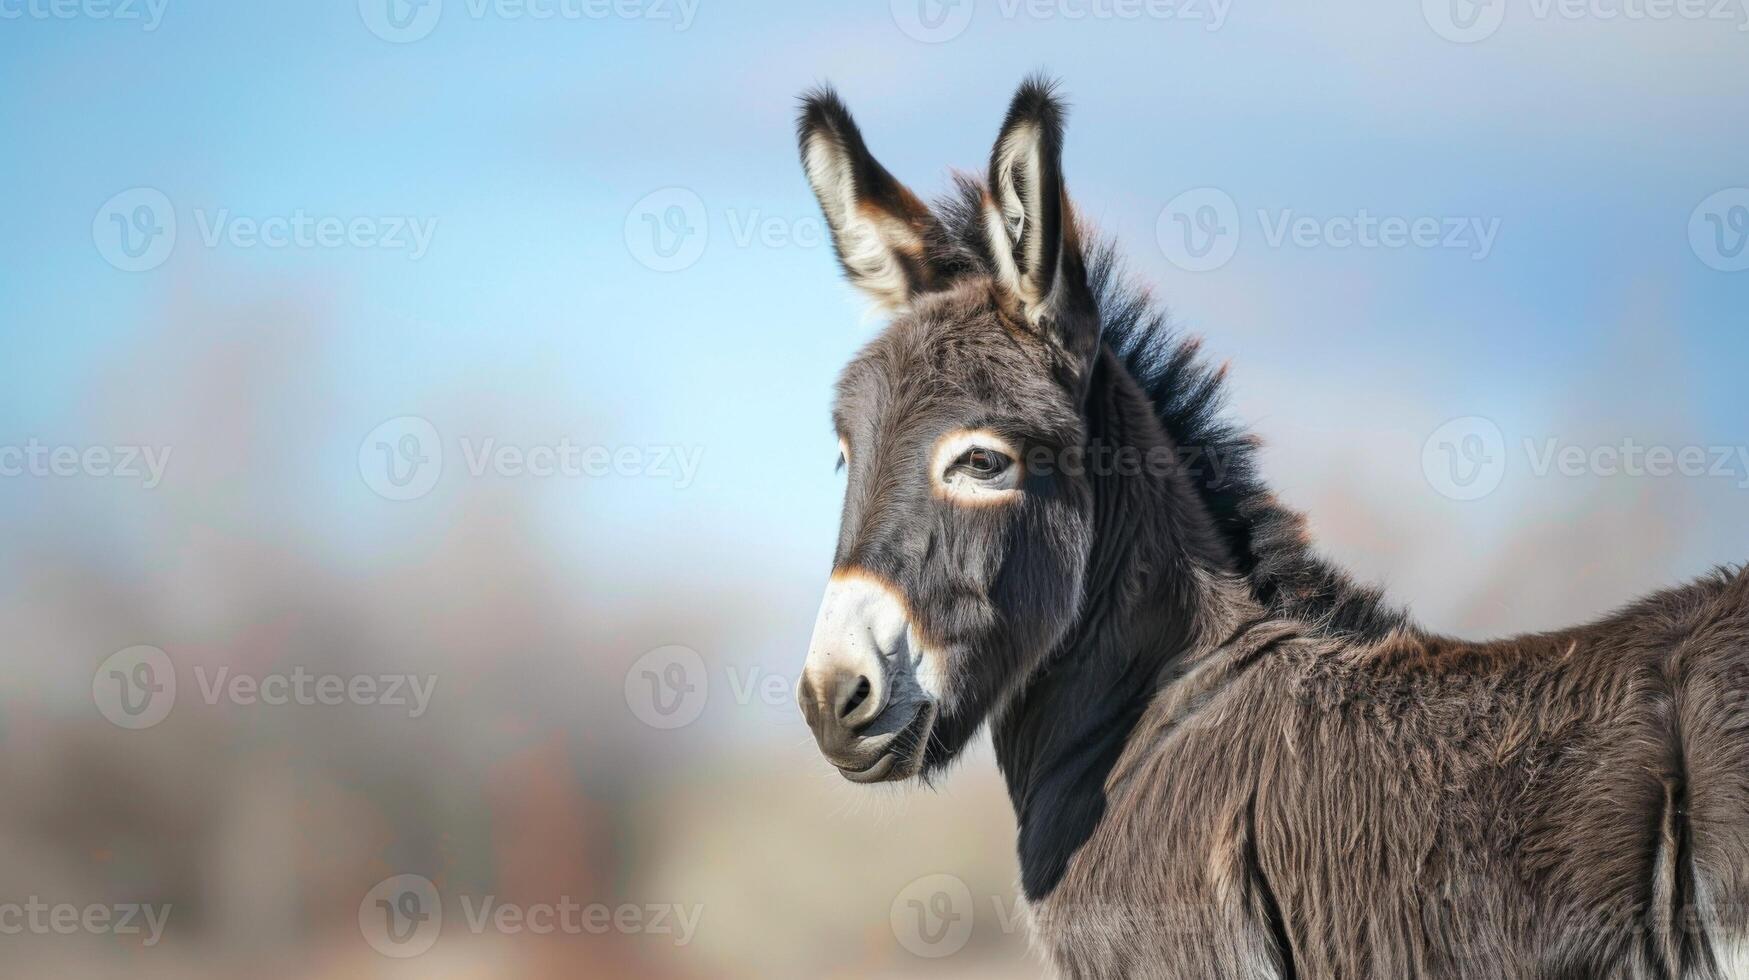 Close-up donkey portrait showing mammal with soft fur and attentive eyes in a natural farm setting photo